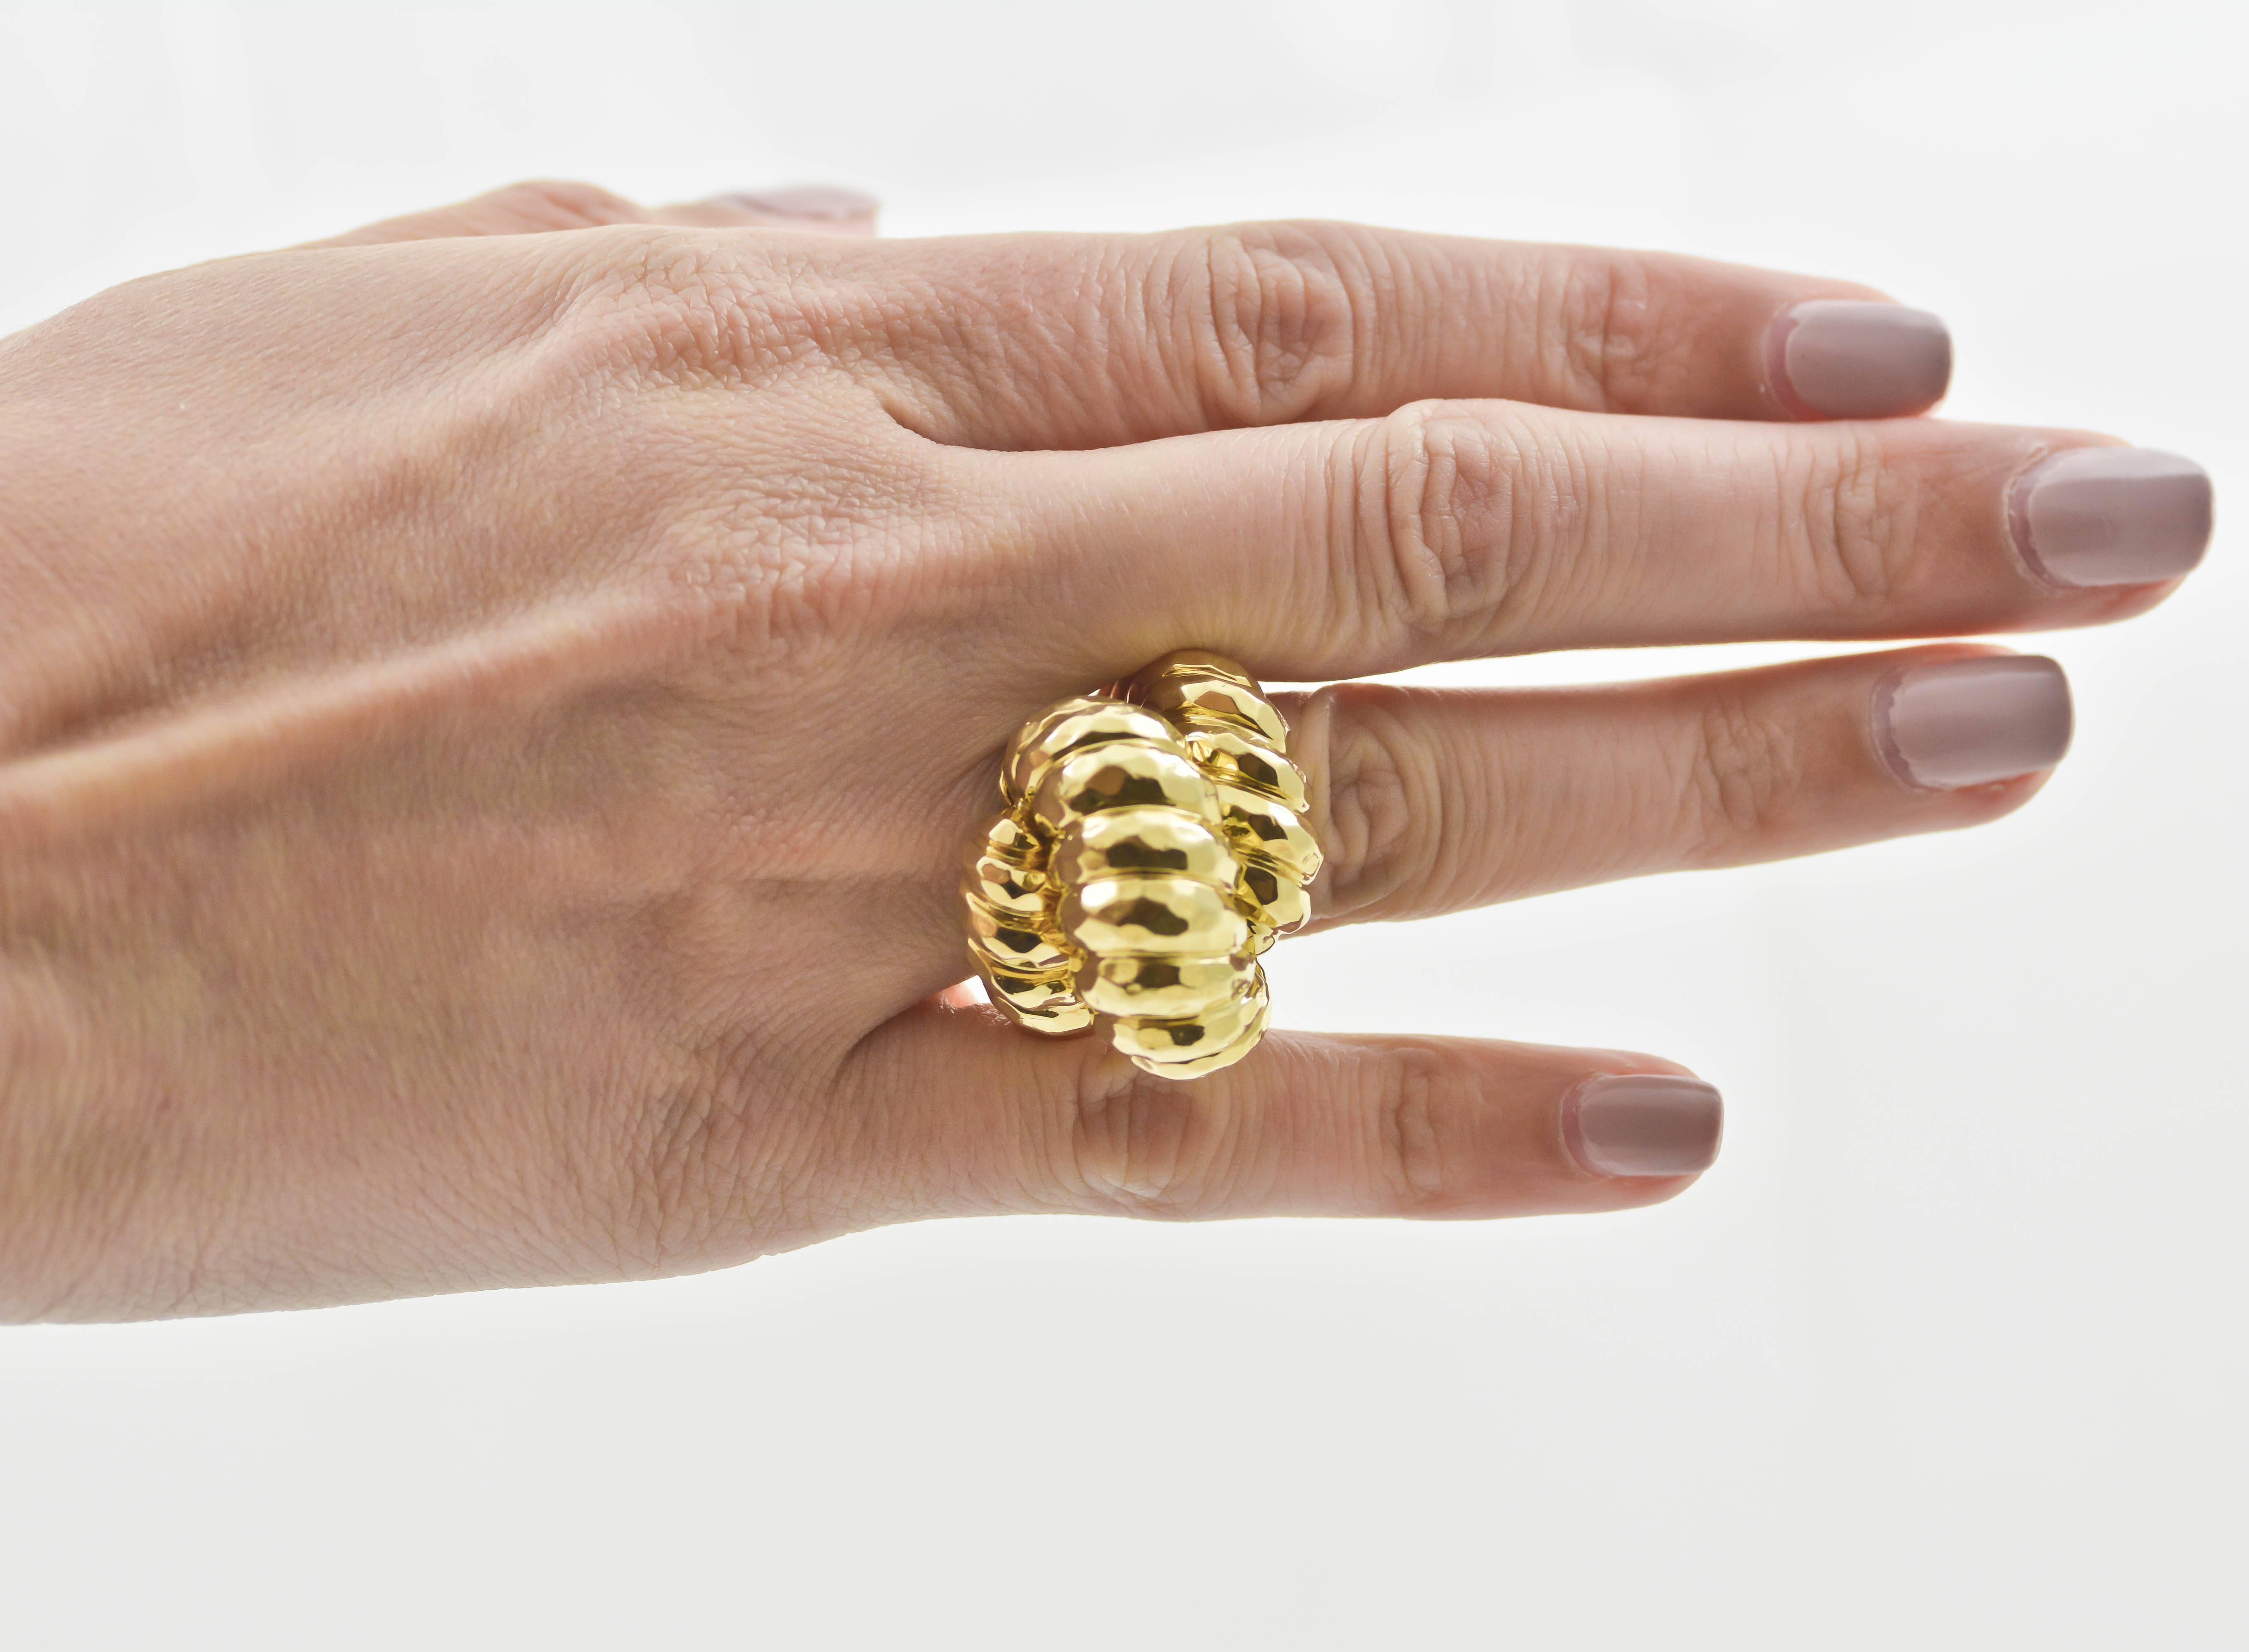 This ring, designed by Henry Dunay, is a vintage 18kt yellow gold piece made to draw the eye with its quintessential Henry Dunay style finish that reflects light with a multi-faceted surface. The gold sweeps flawlessly around the wearer’s finger,